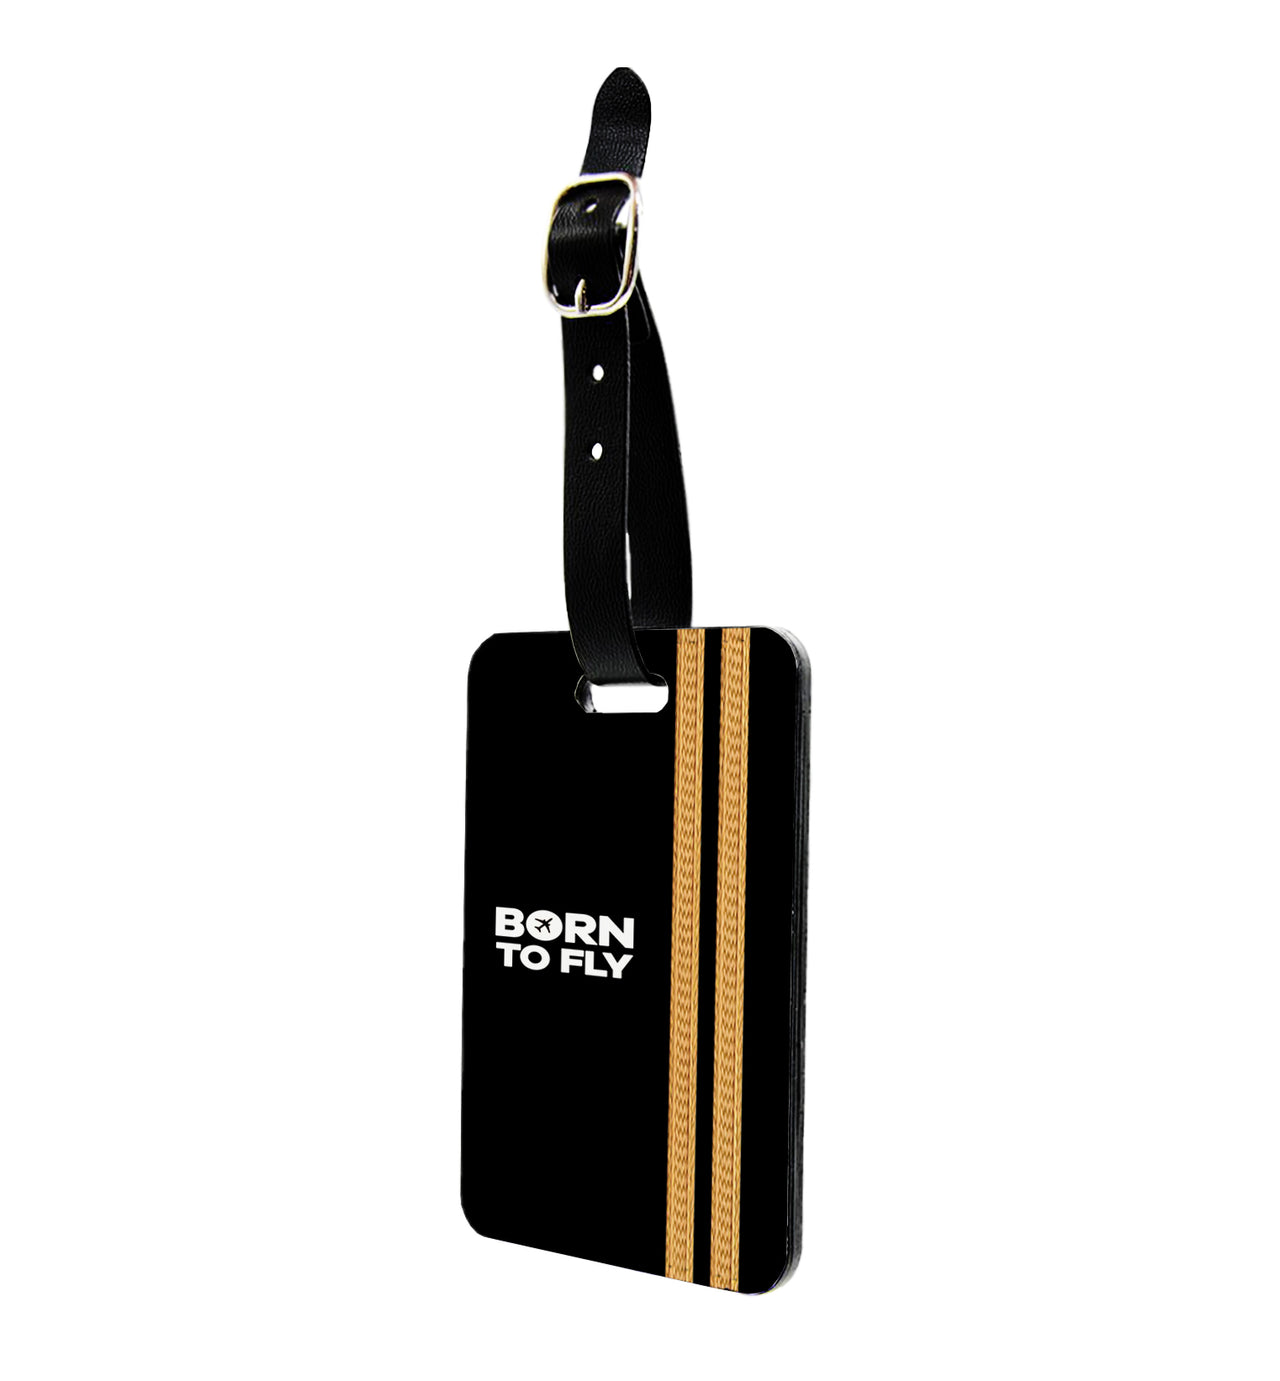 Born to Fly & Pilot Epaulettes (4,3,2 Lines) Designed Luggage Tag